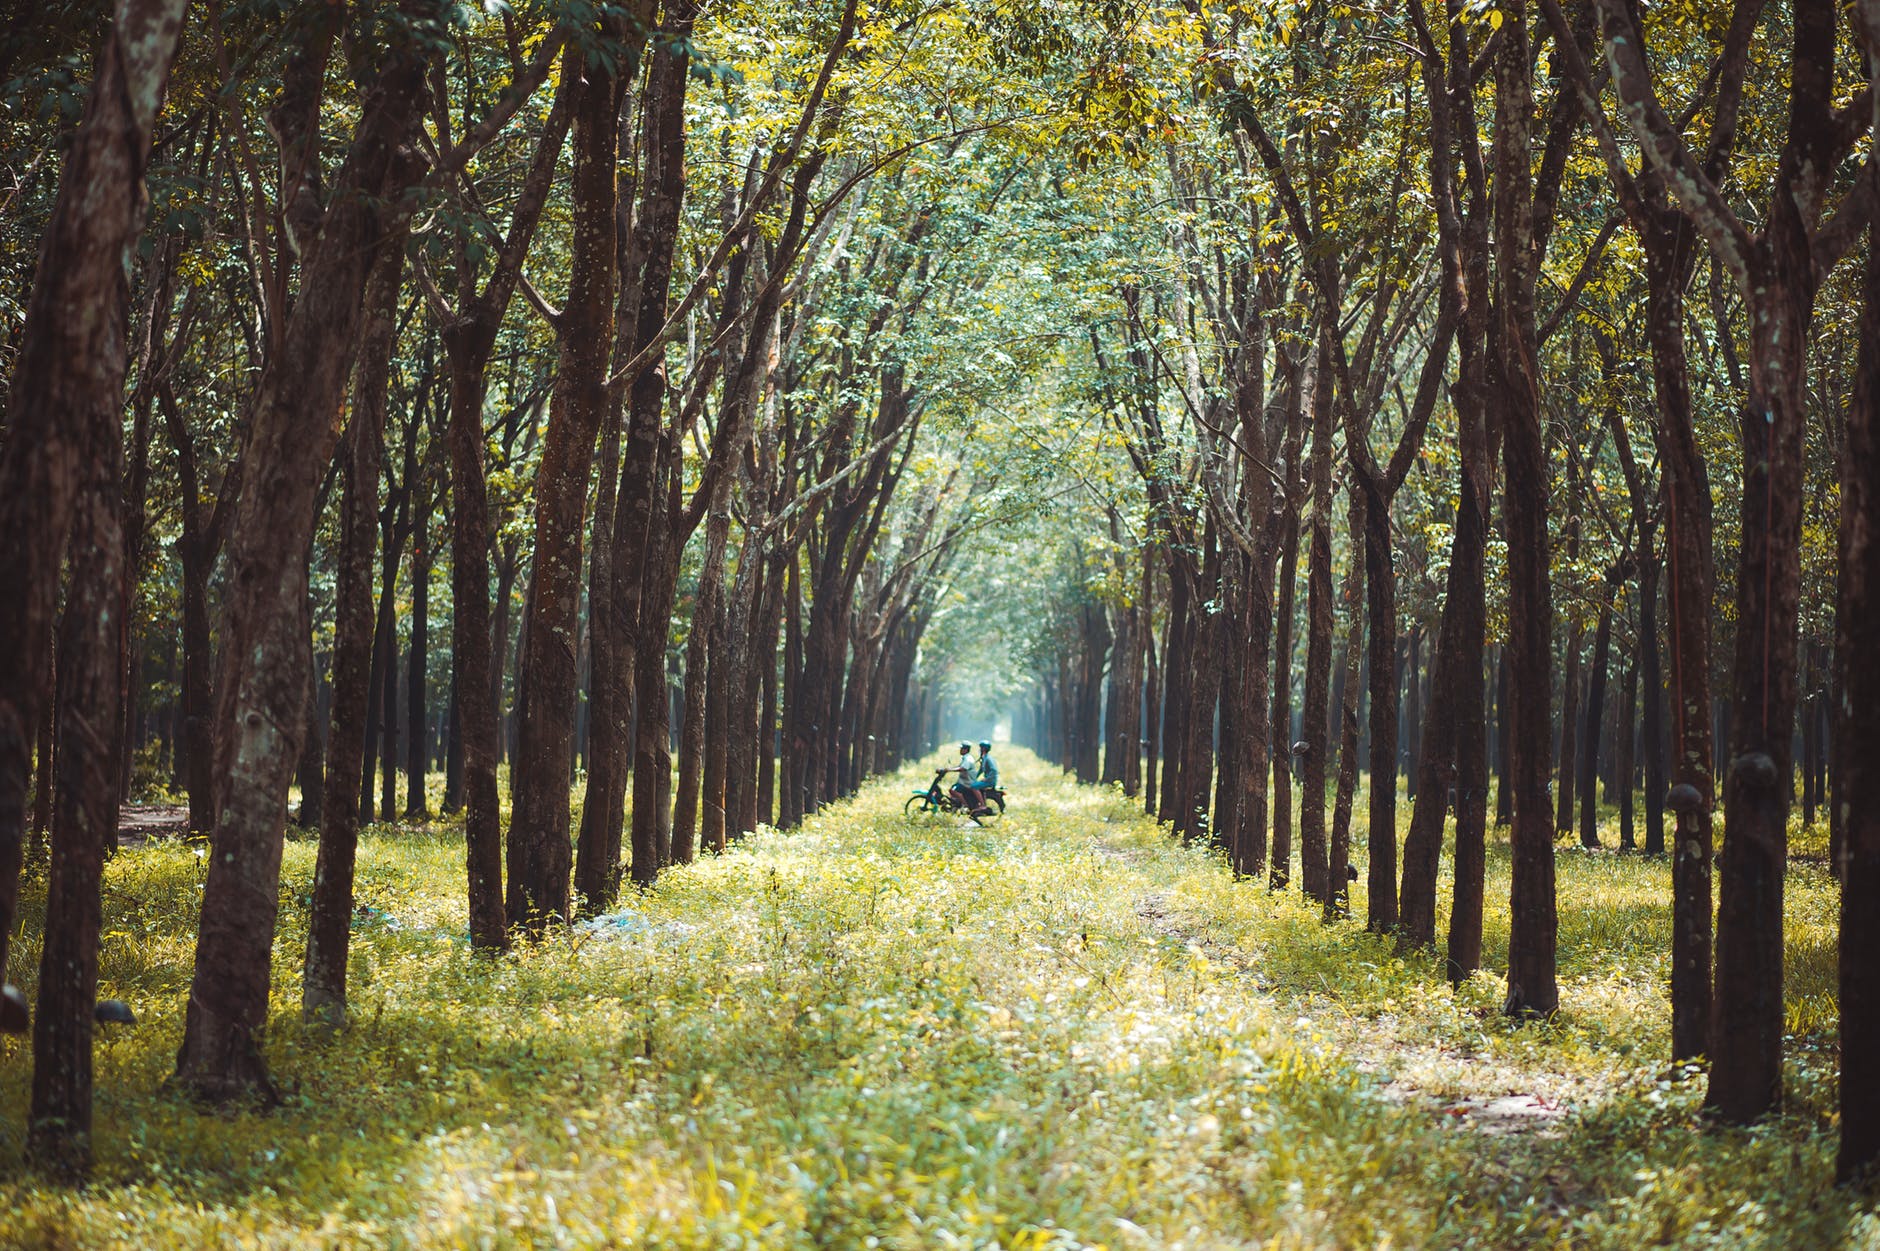 Photo of two person riding motorcycle in the middle of  forest